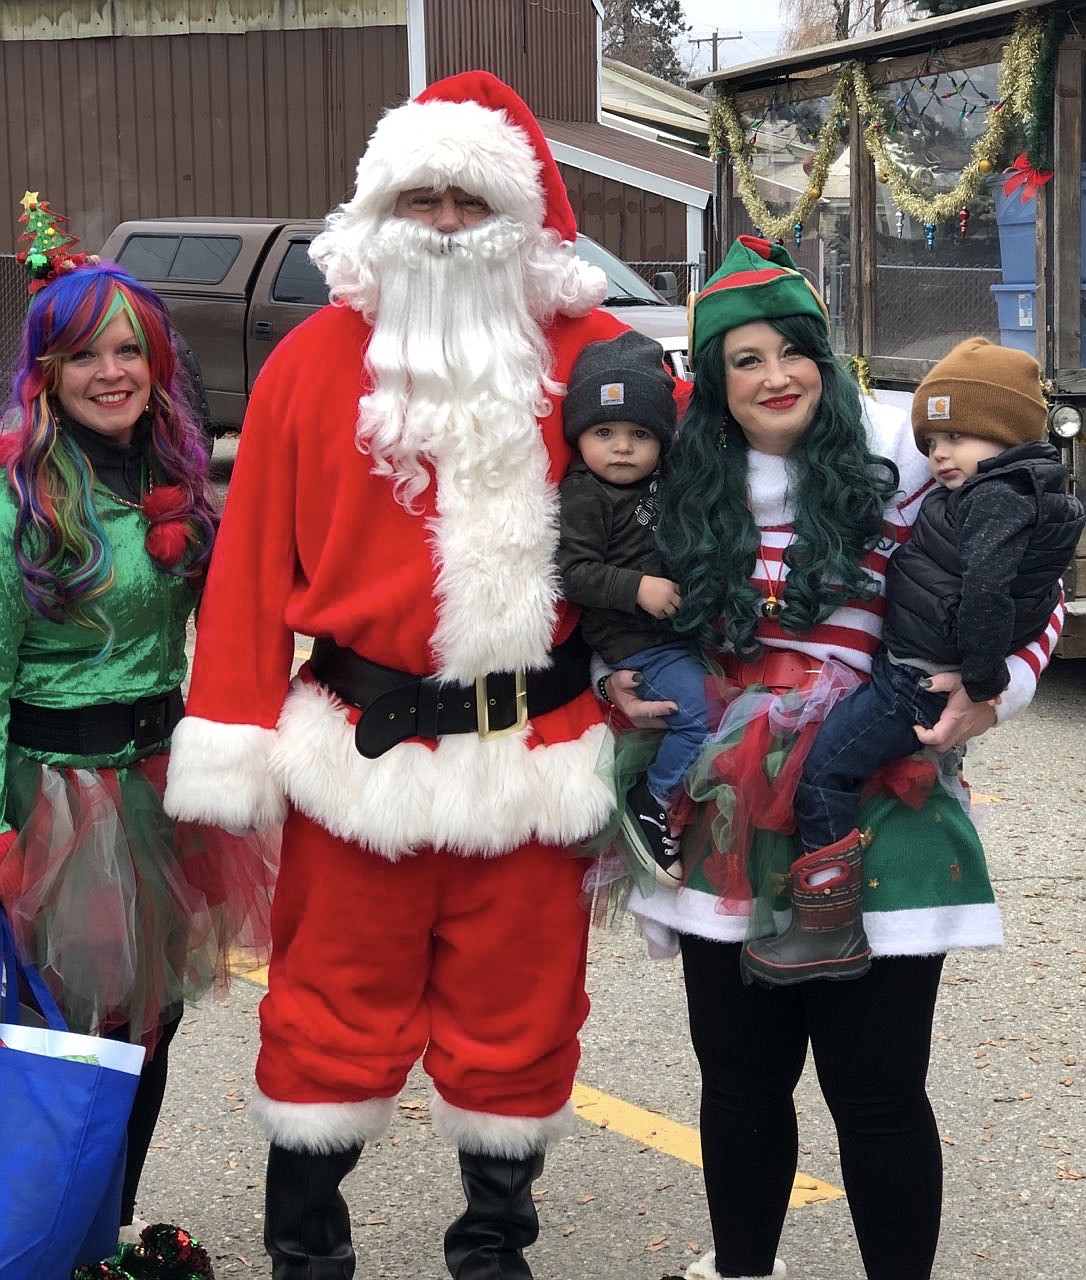 Santa and his elves pose for a photo with children on their route Saturday in Ponderay.